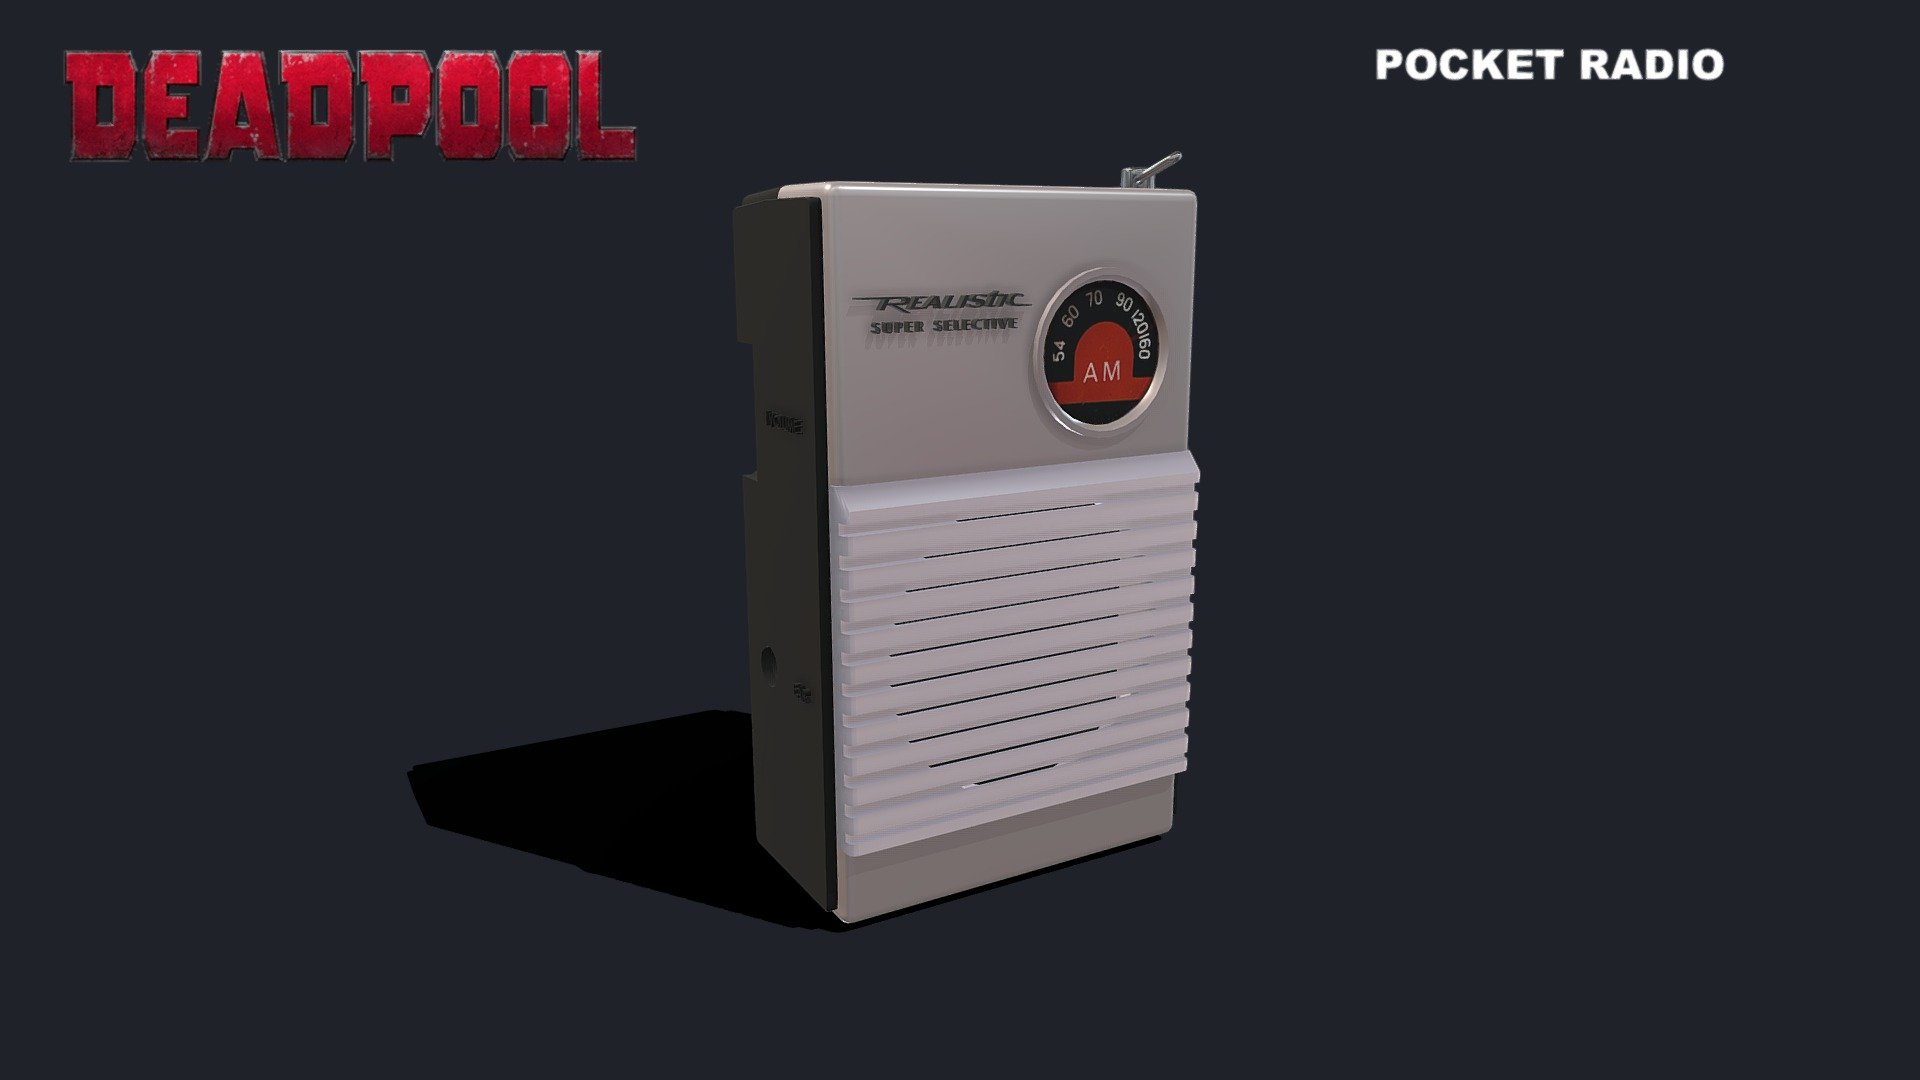 Here's my model of Deadpools pocket radio. This prop was featured in the original movie when Wade was listening to Salt n Pepper while sitting on the bridge. These are hard to find for sale and most settle for the Siemens one that was featured in the trailer. 

The model took me 3 hours to make in 3DS Max, using what reference I had. 

Thanks for looking :) - Deadpool Radio - 3D model by paulelderdesign 3d model